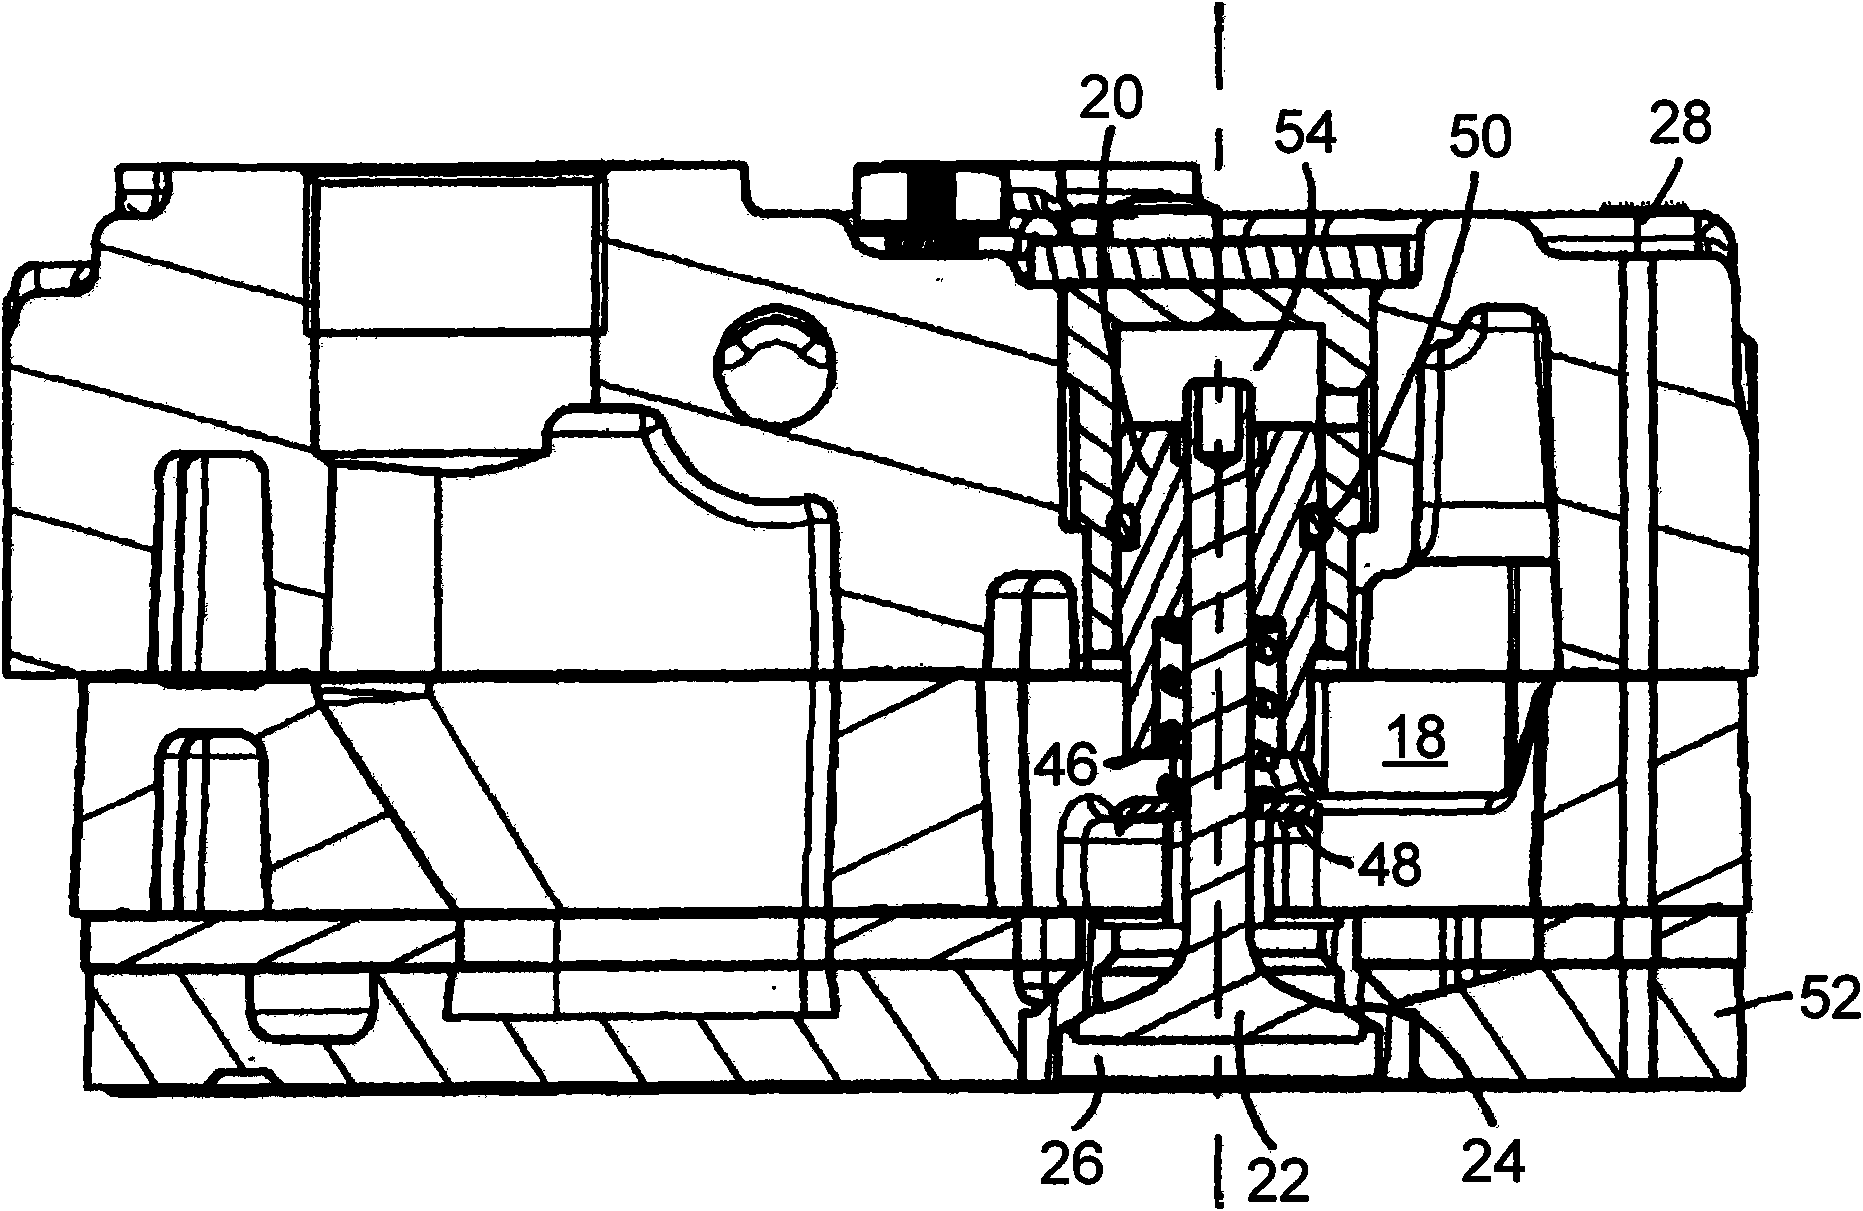 Compressor having an energy saving device and method for the energy-saving operation of a compressor